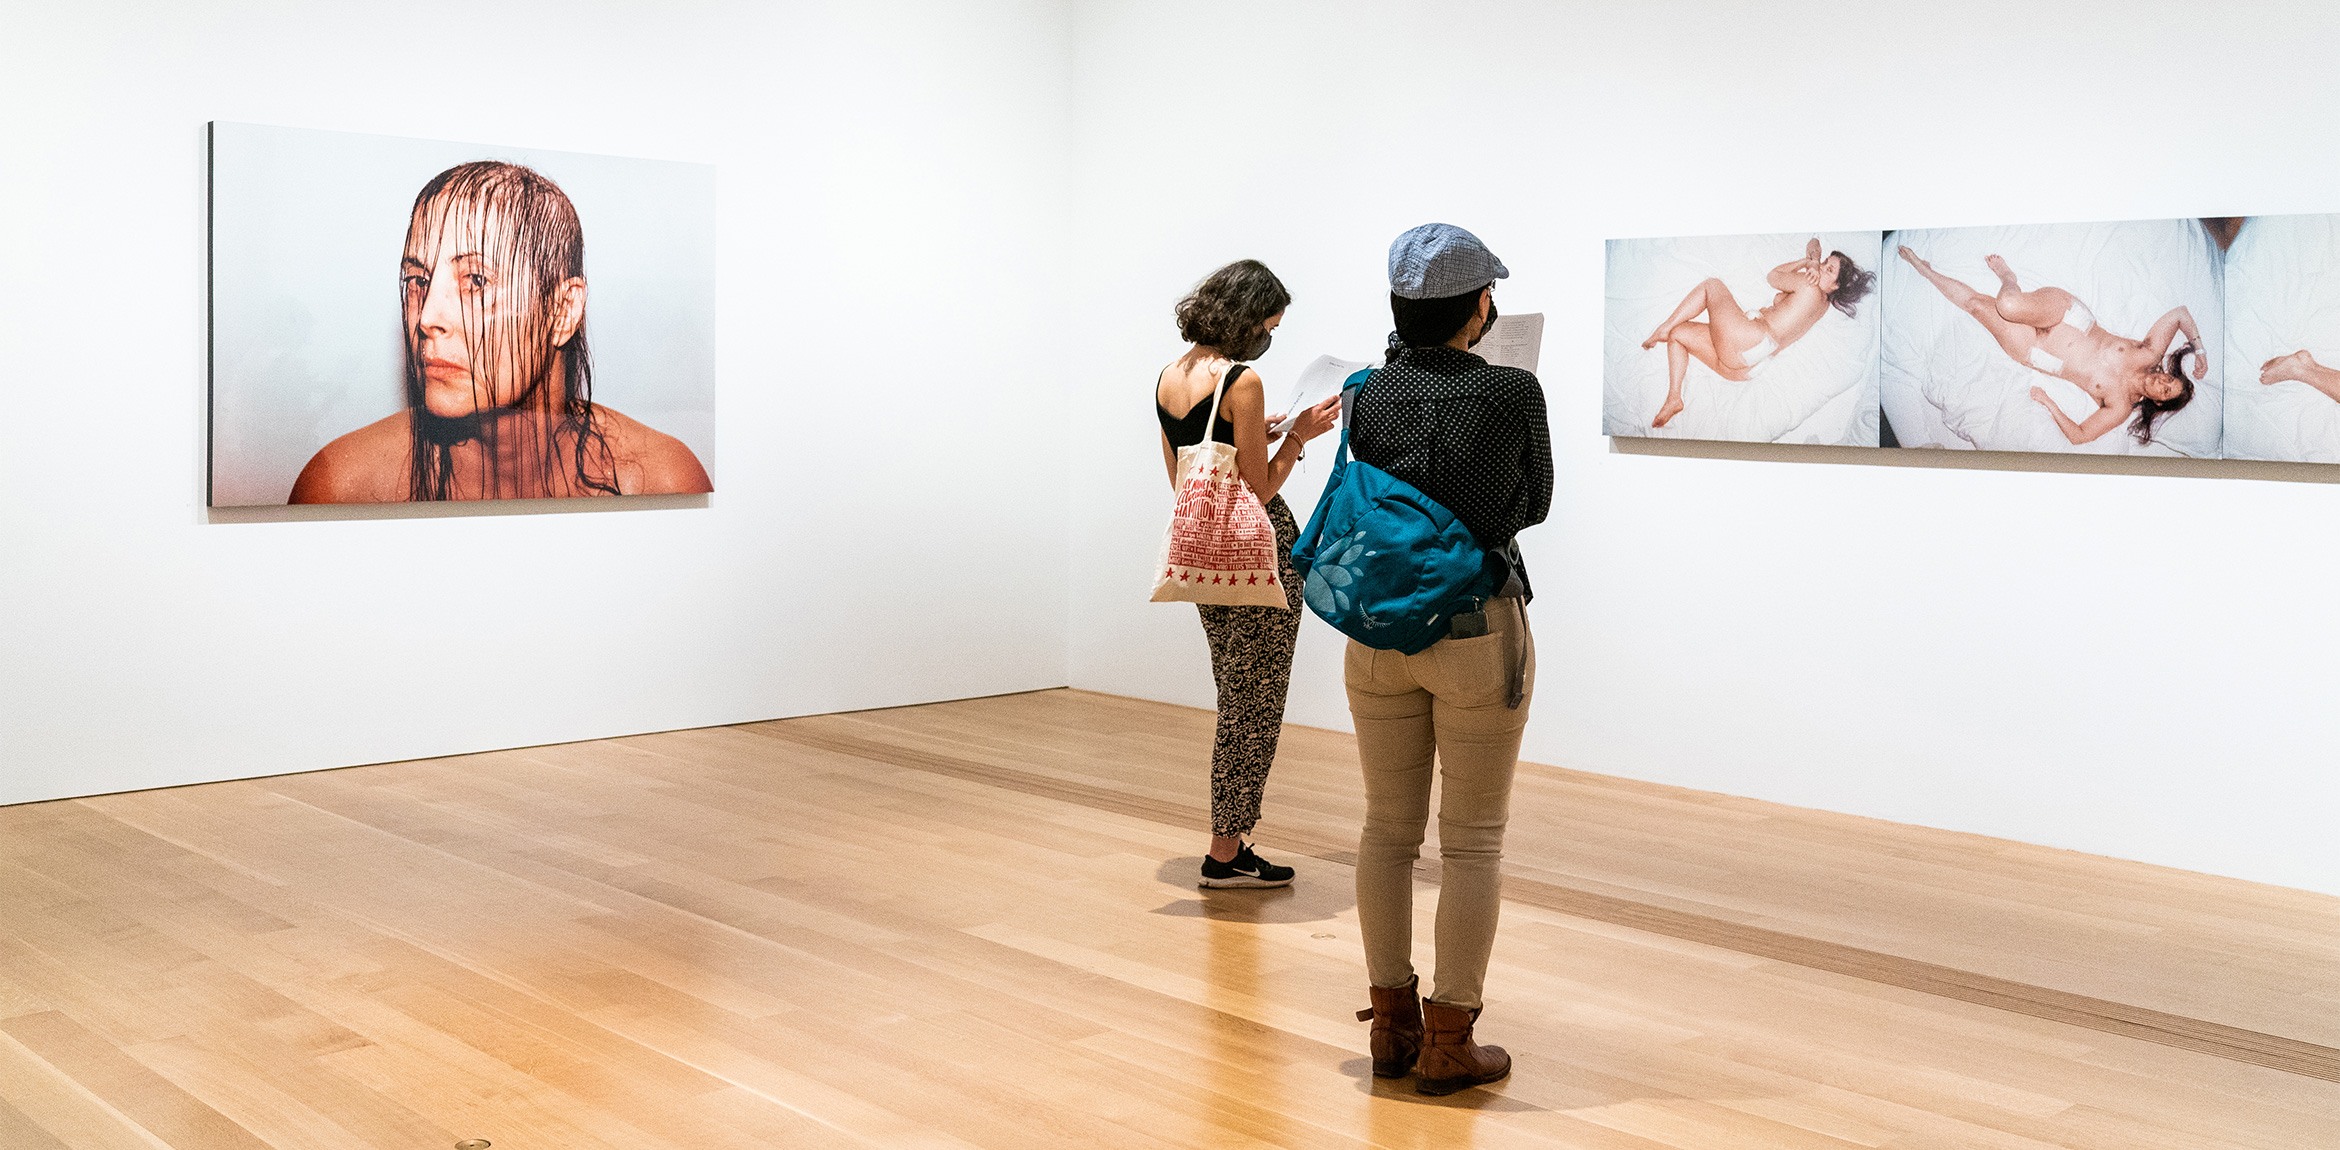 Two visitors standing in the East Gallery. On the left is a photograph portrait of the artist Hannah Wilke and on the right is a triptych featuring views of Hannah Wilke from above.